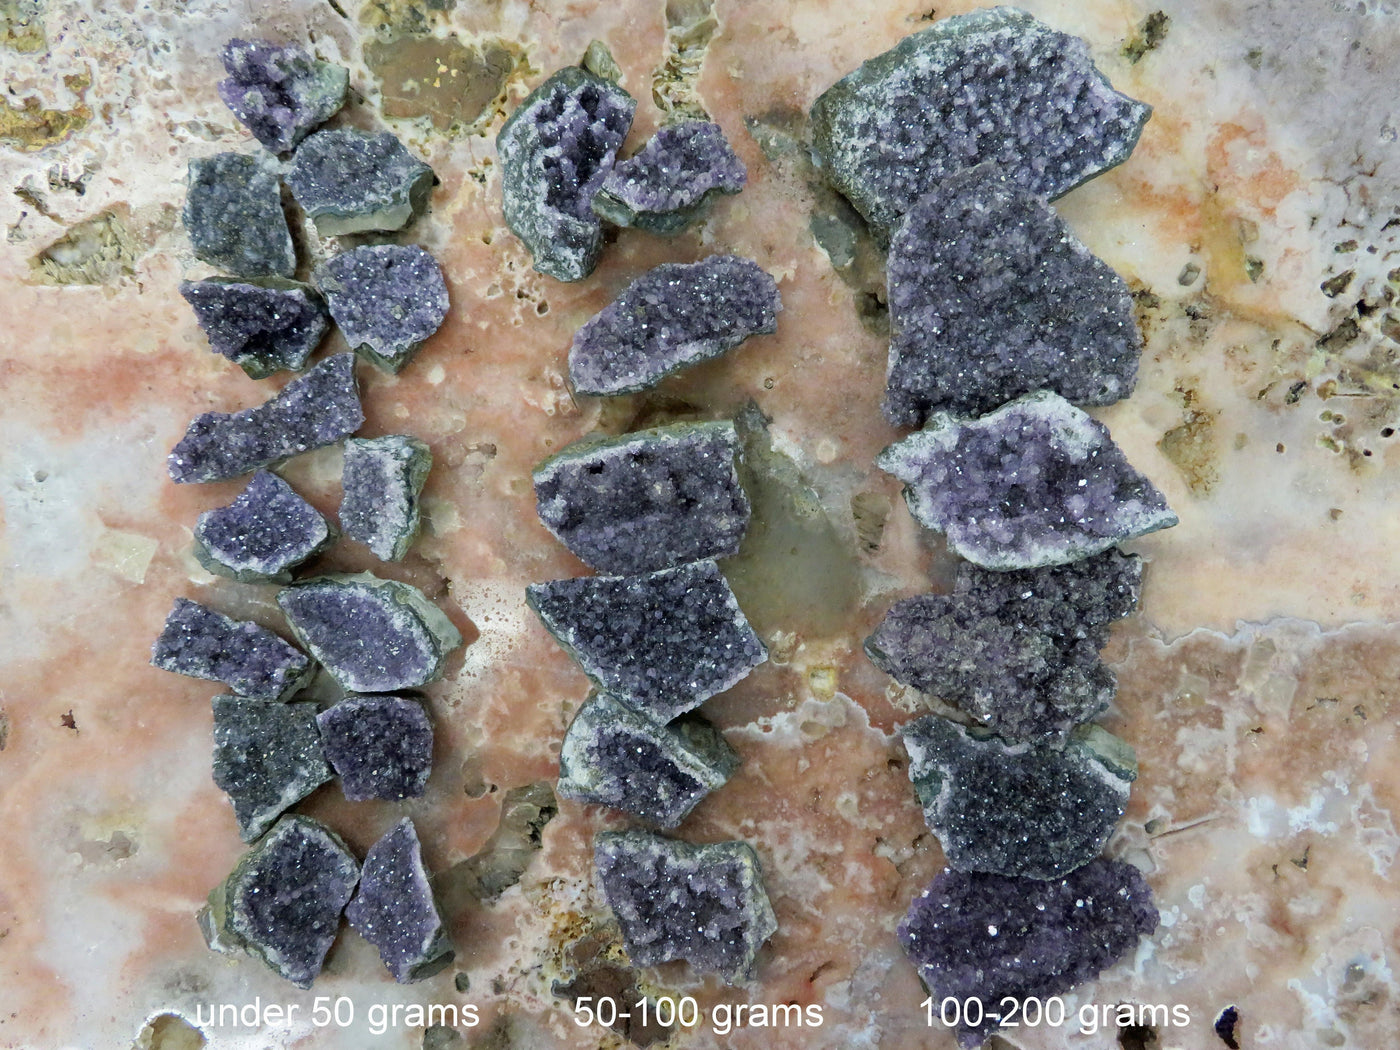 Amethyst clusters are being divided into 3 different weight categories in this picture, all three rows are lined up next to each other. the amethyst clusters are being displayed on a marbled surface.